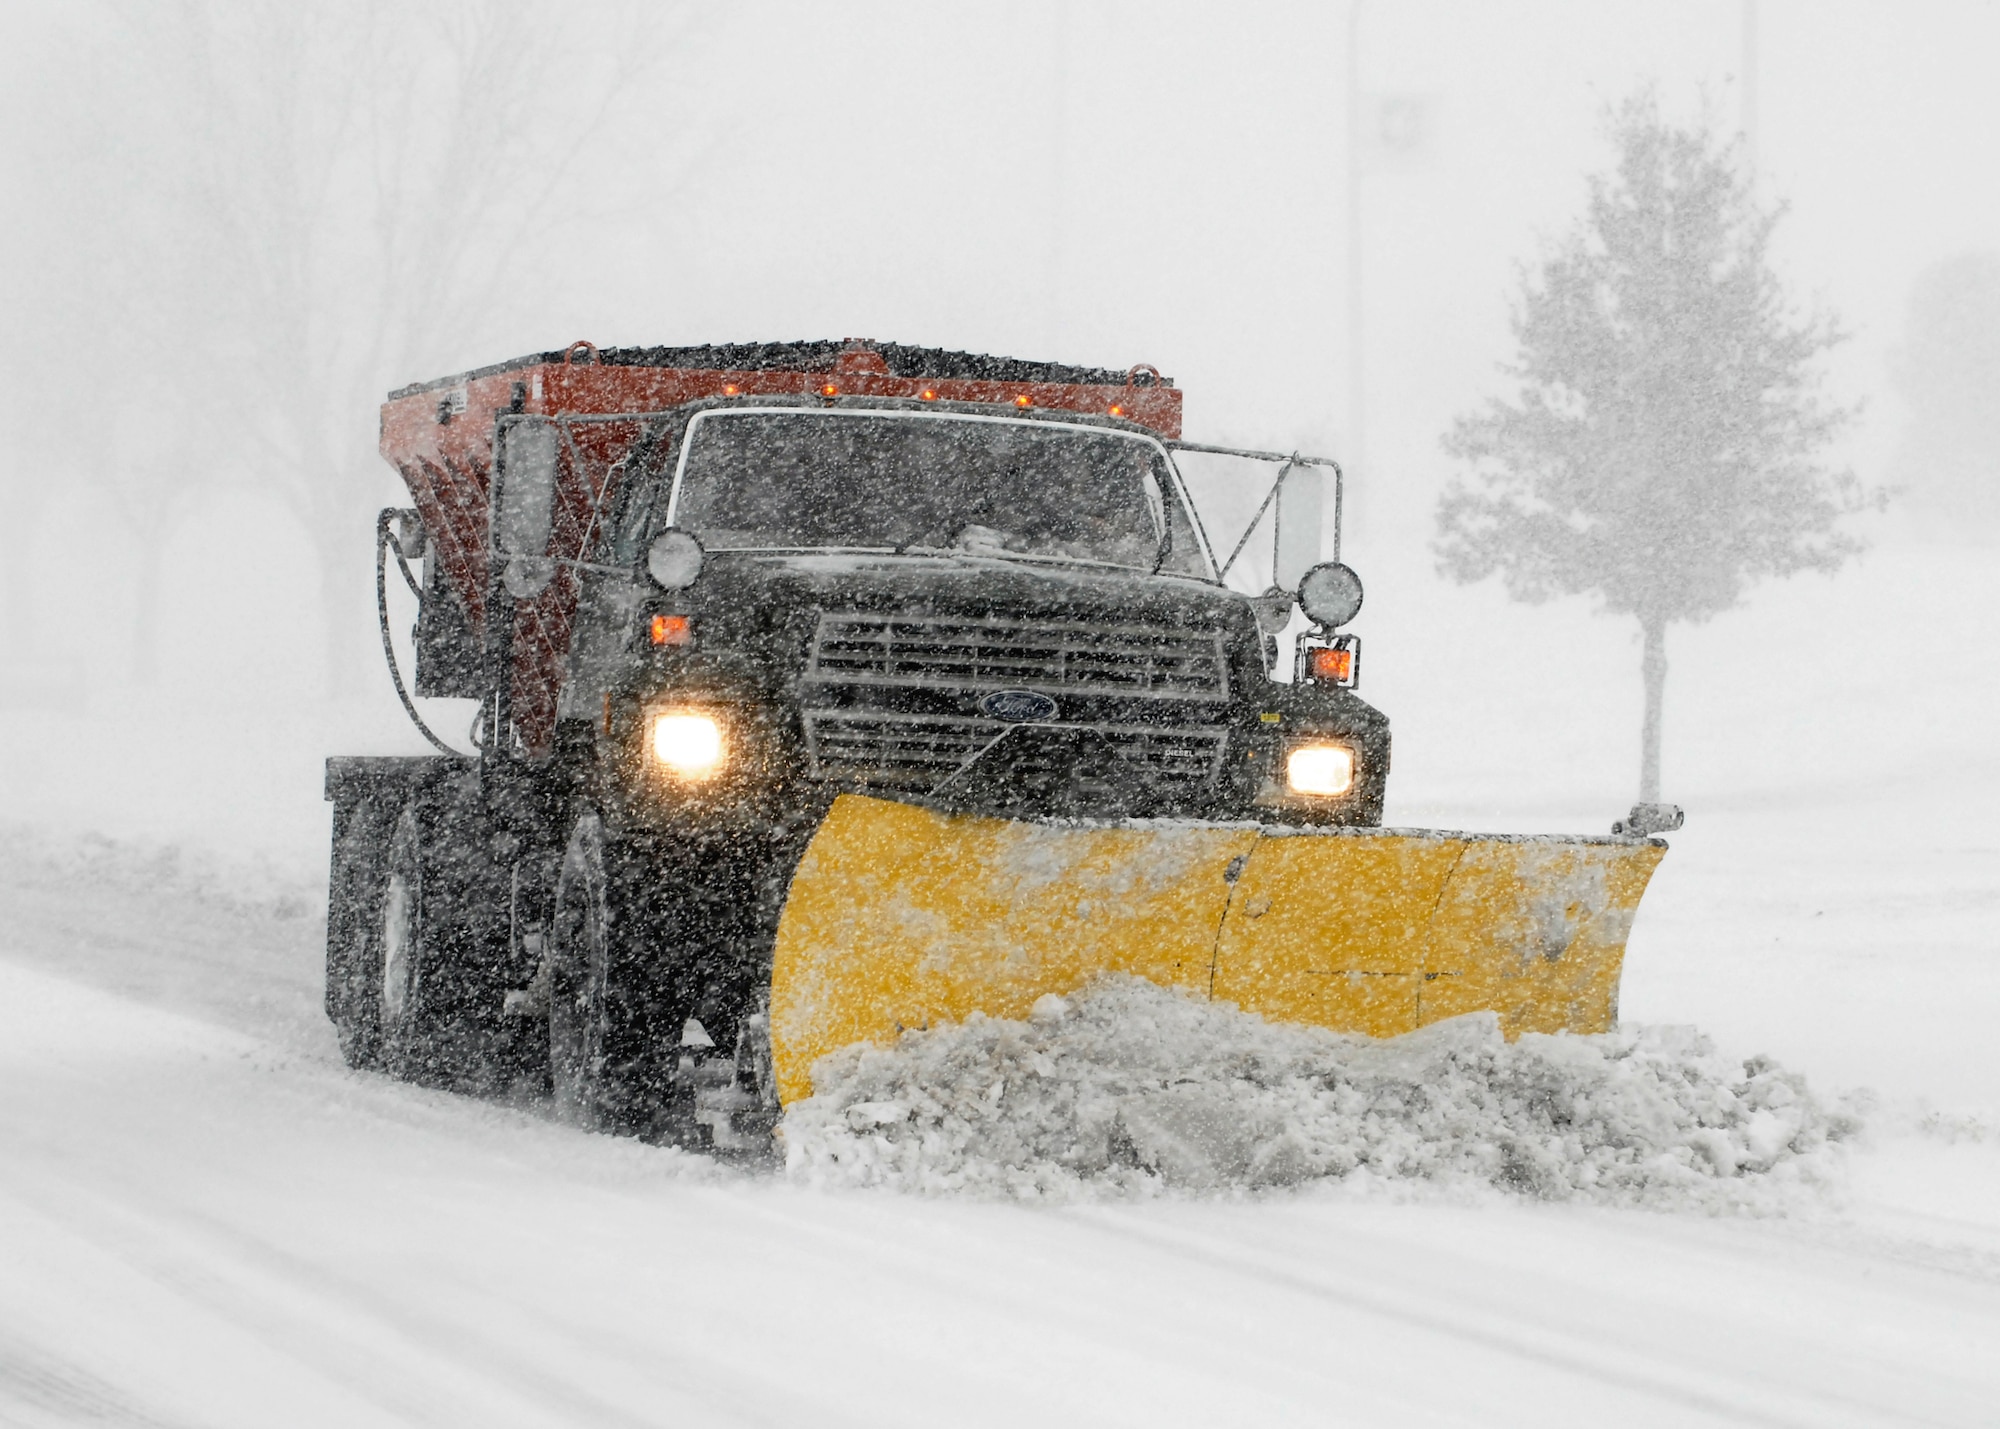 A truck with a snow blade clears a road on Sheppard Air Force Base, Texas, Dec. 24 after a blizzard blew through North Texas. Some places in the region received 10-15 inches of snow and ice. (U.S. Air Force photo/Harry Tonemah)